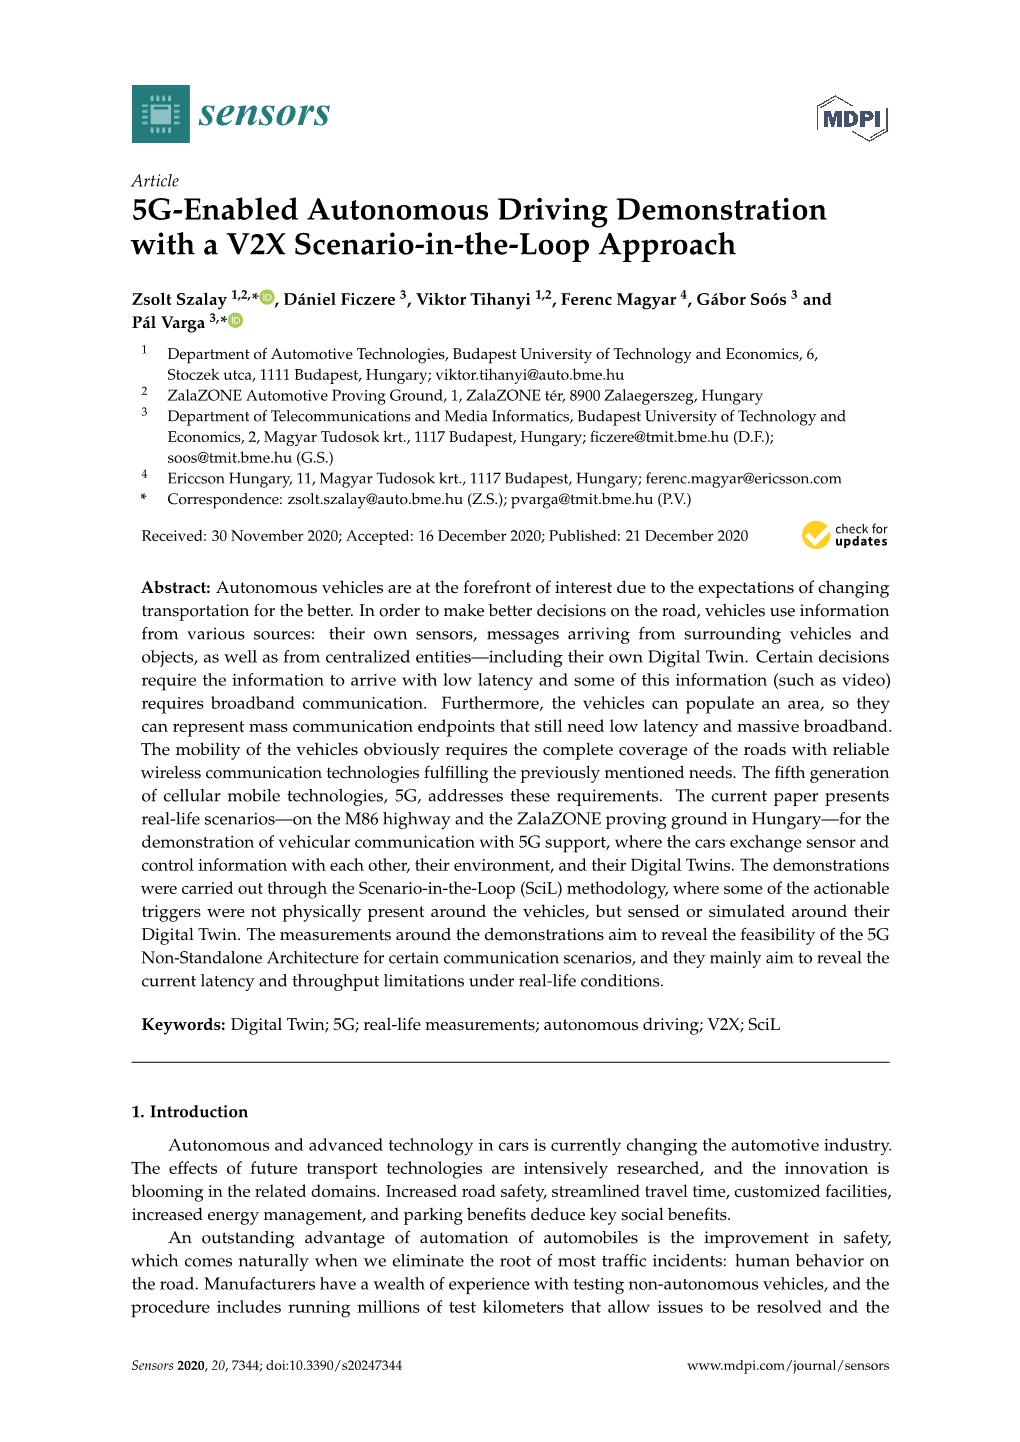 5G-Enabled Autonomous Driving Demonstration with a V2X Scenario-In-The-Loop Approach